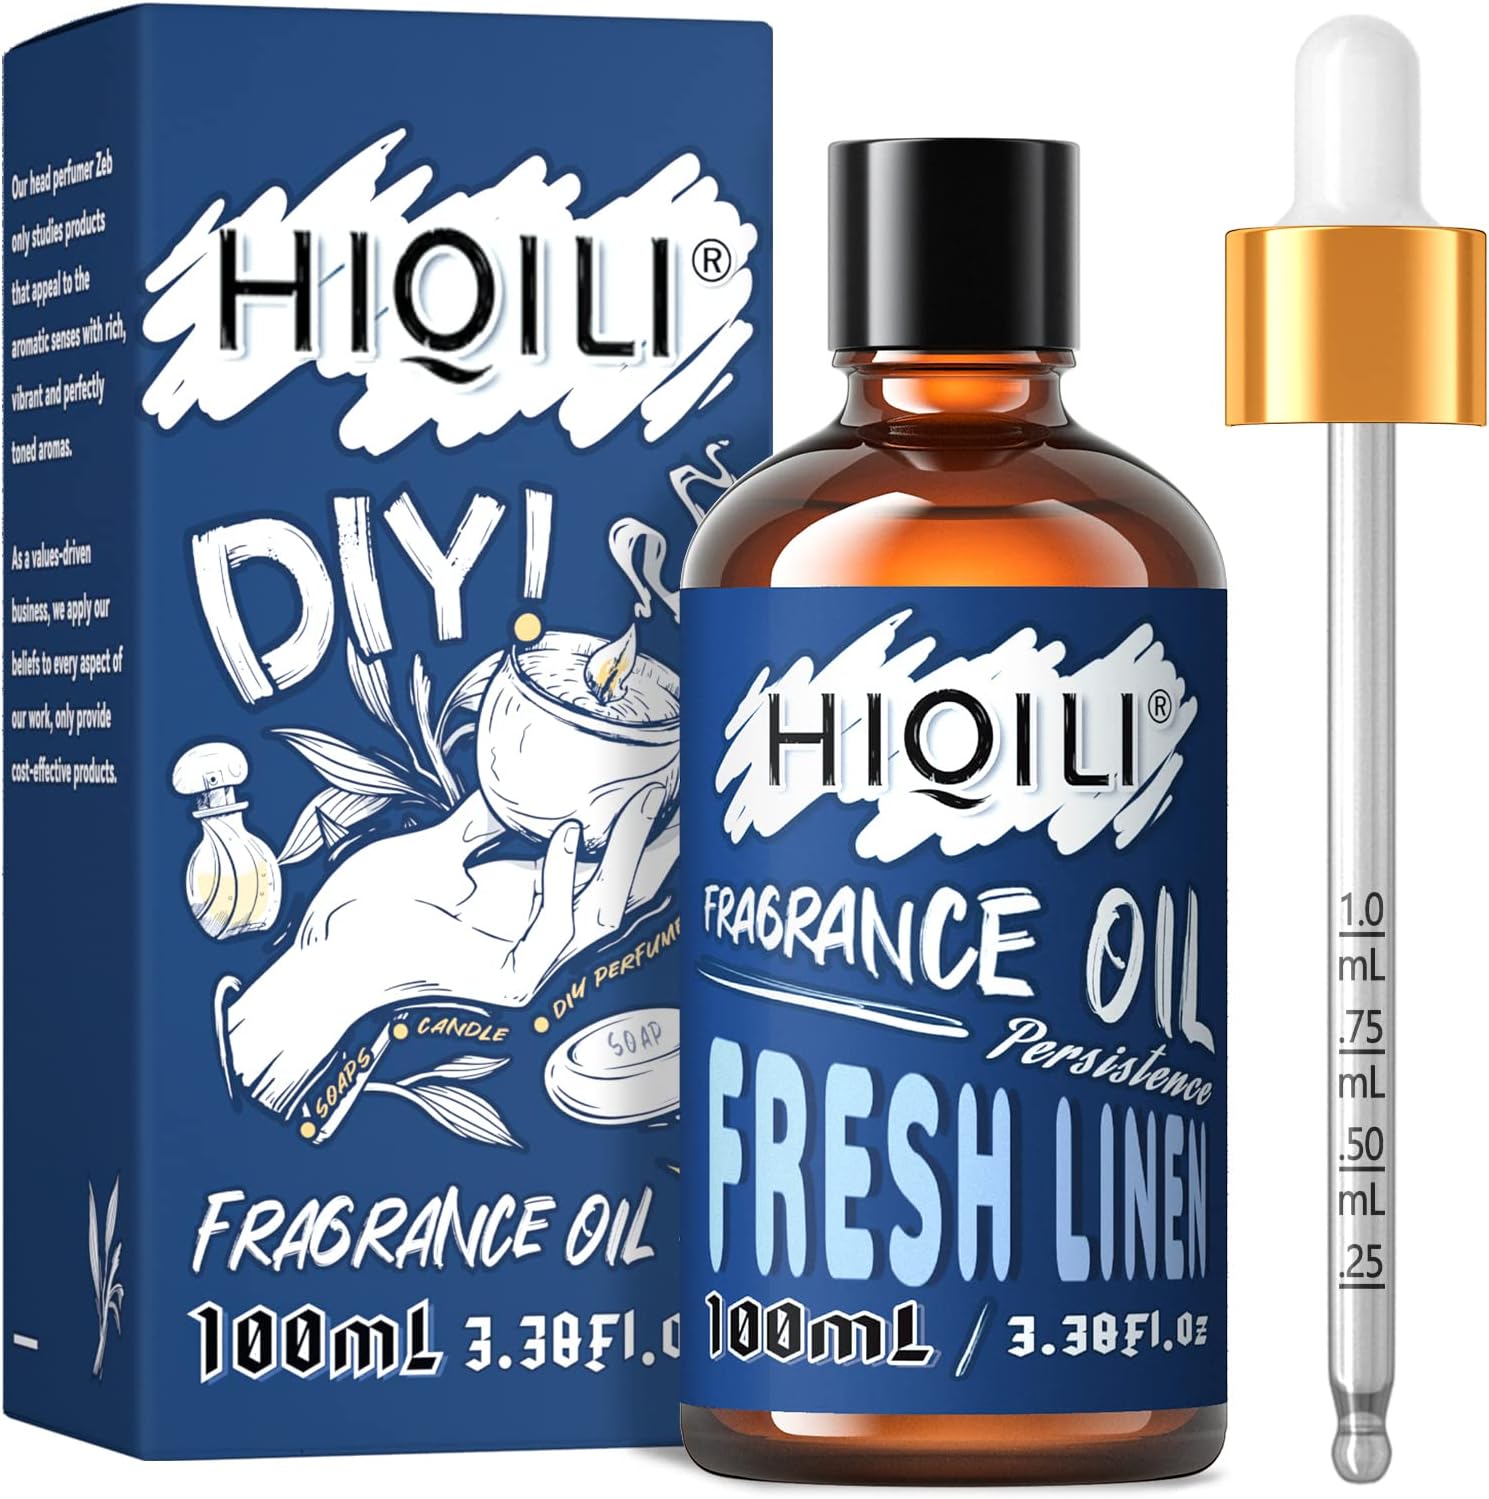 HIQILI Fresh Linen Fragrance Oil 100ml, Single Essential Oil for Diffuser Car Freshies, Clean Fresh Scent for Candle Making Soap Laundry 3.38 Fl Oz